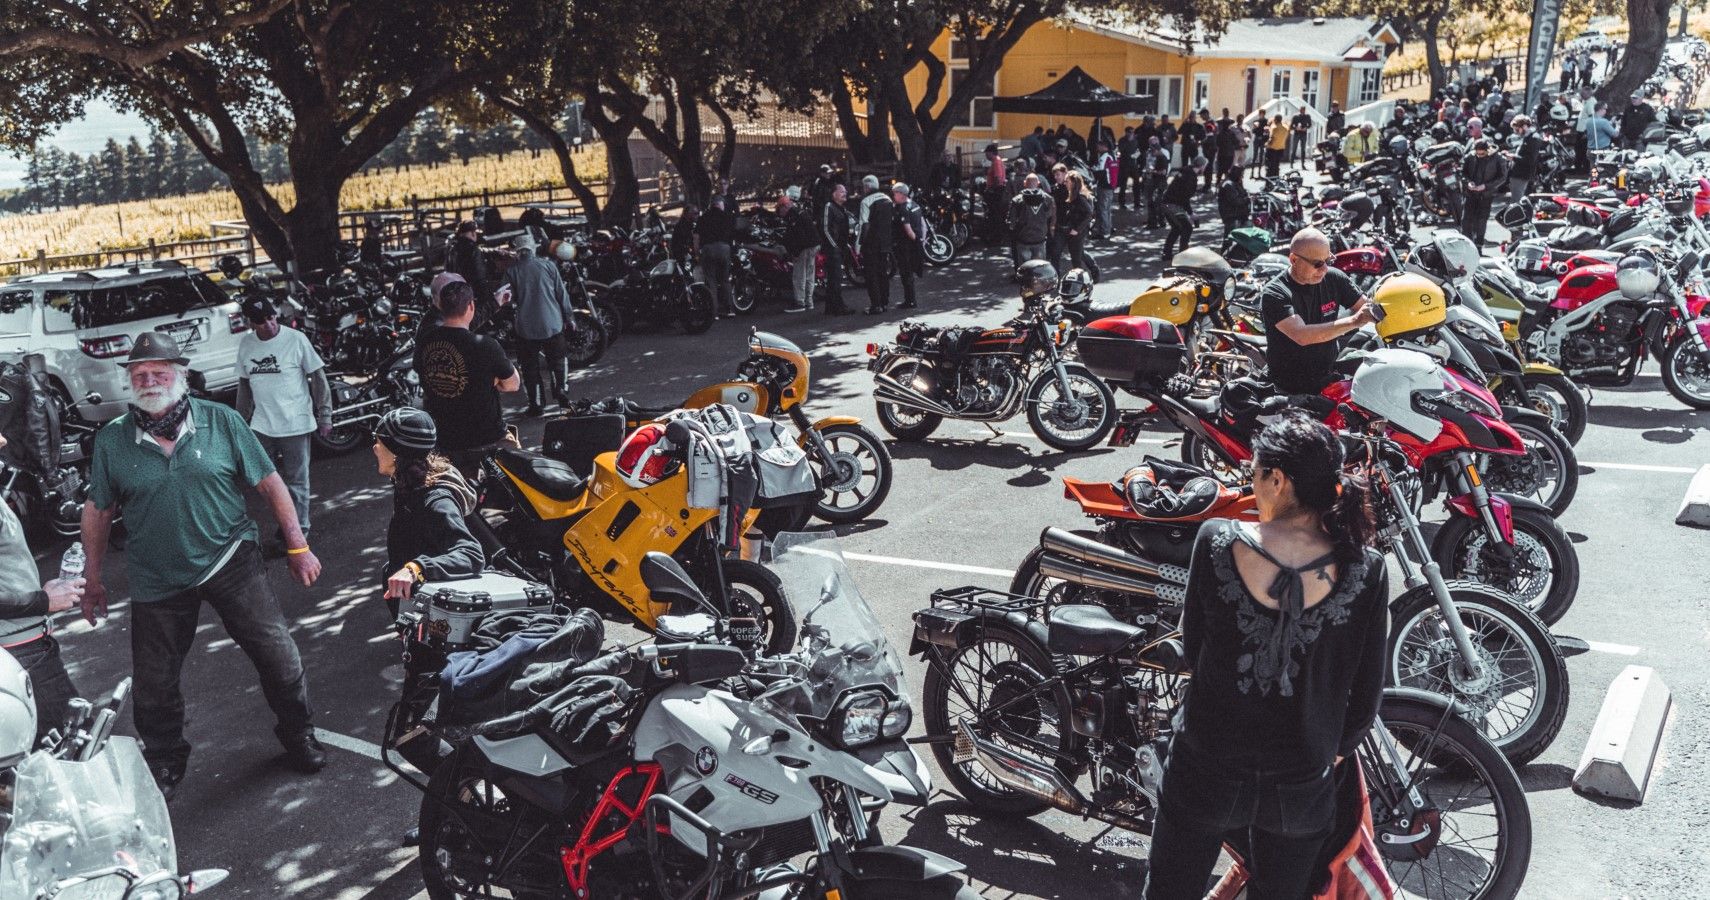 Quail Motorcycle Gathering is the largest motorcycle event in America